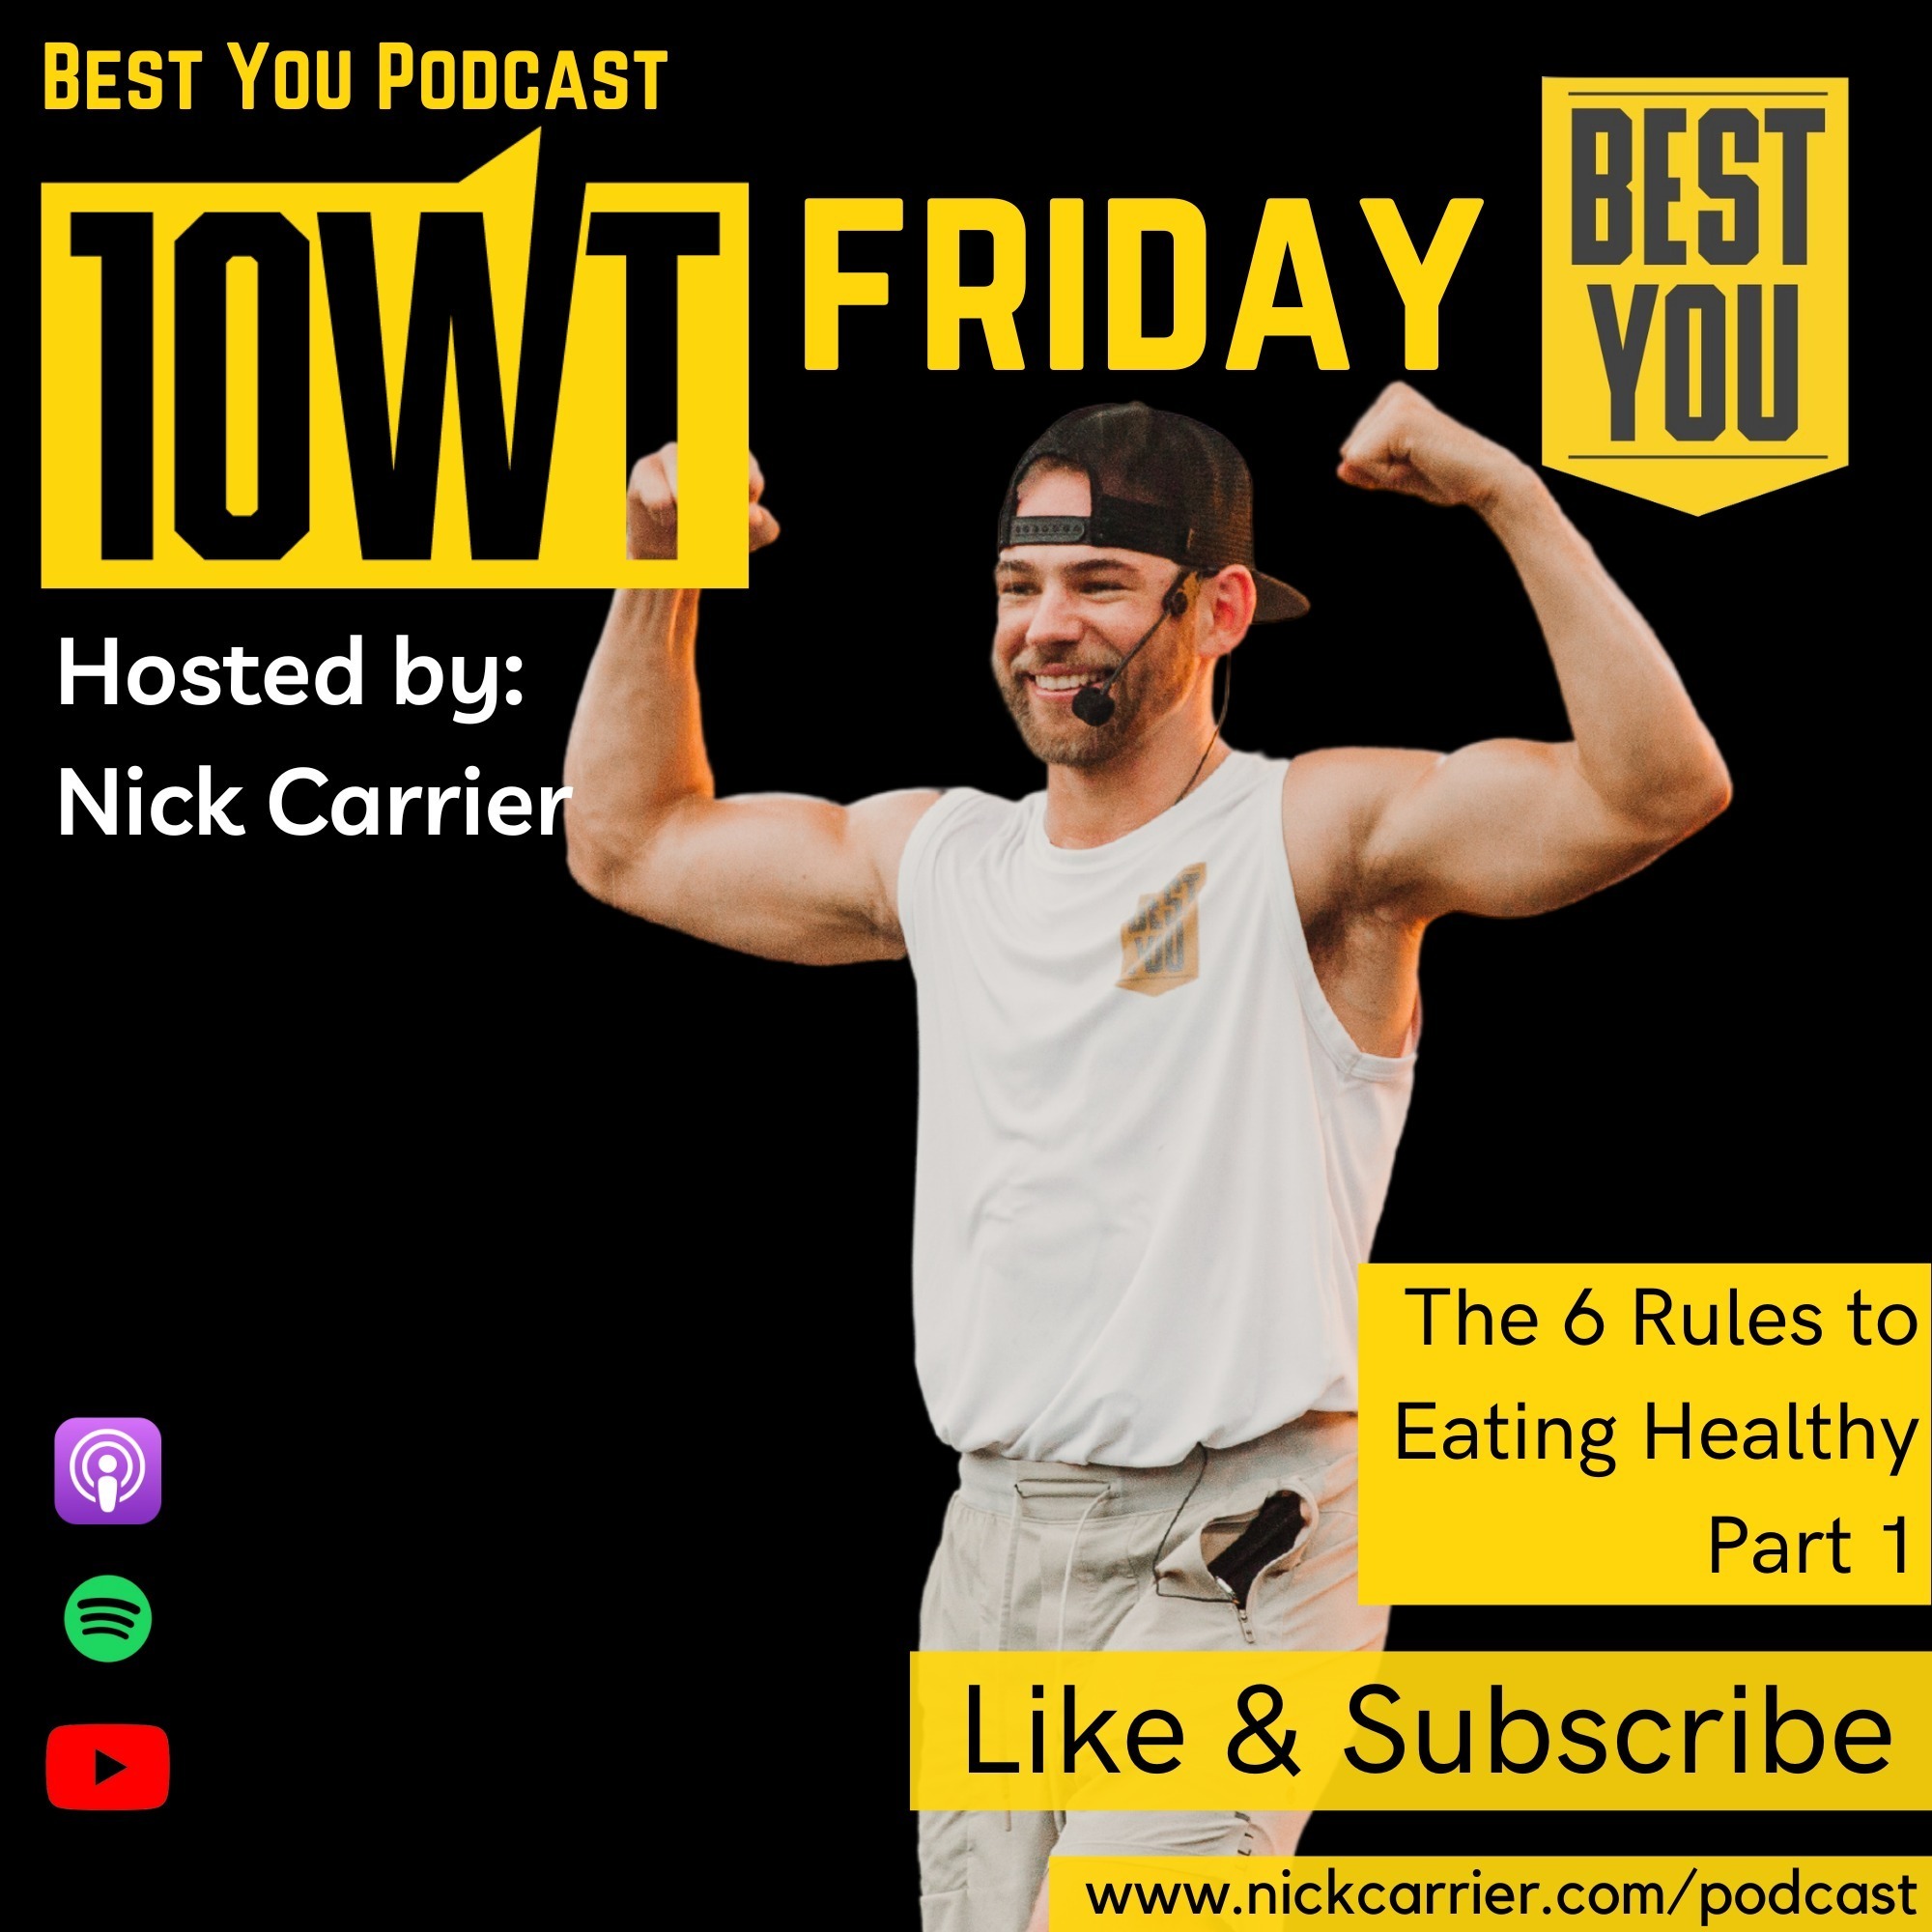 10WT Friday - The 6 Rules to Eating Healthy - Part 1